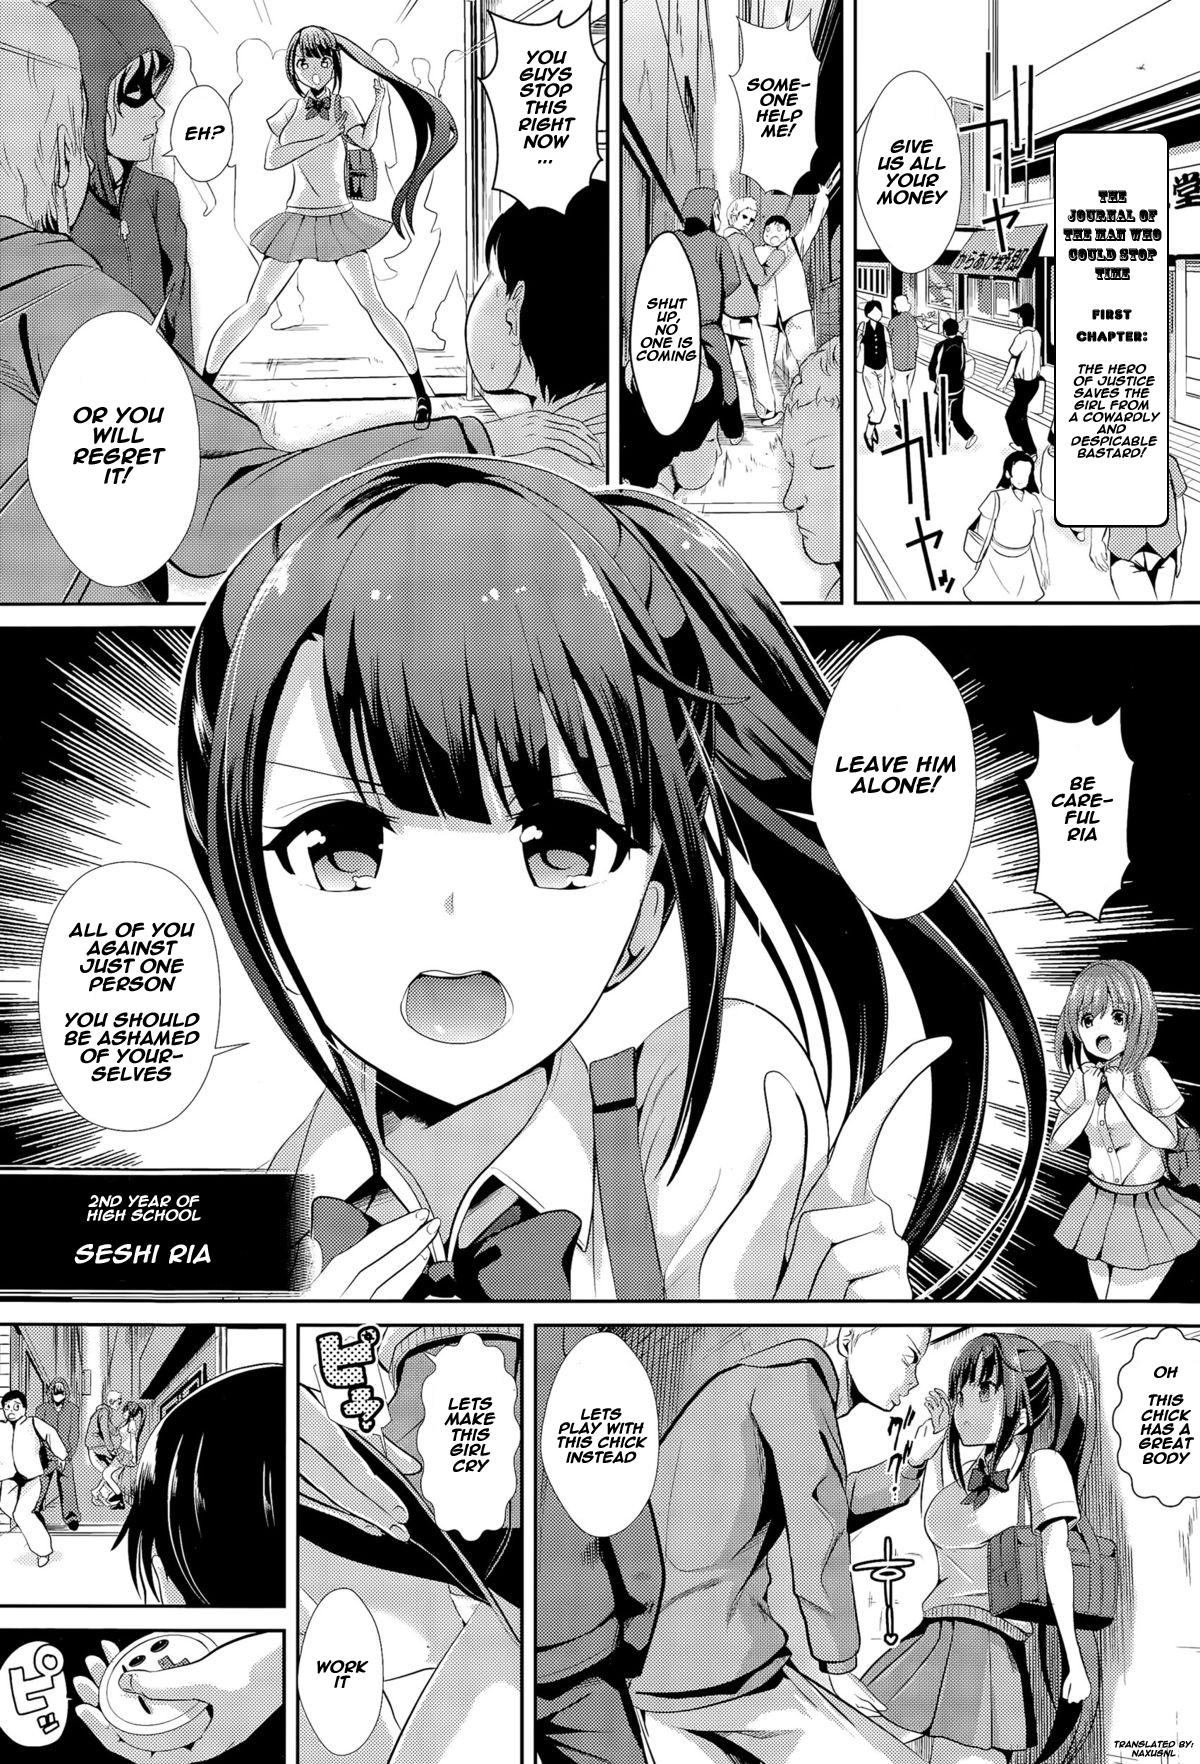 Innocent Jikan Teishi no Otoko | The journal of the man who could stop time Wetpussy - Page 1